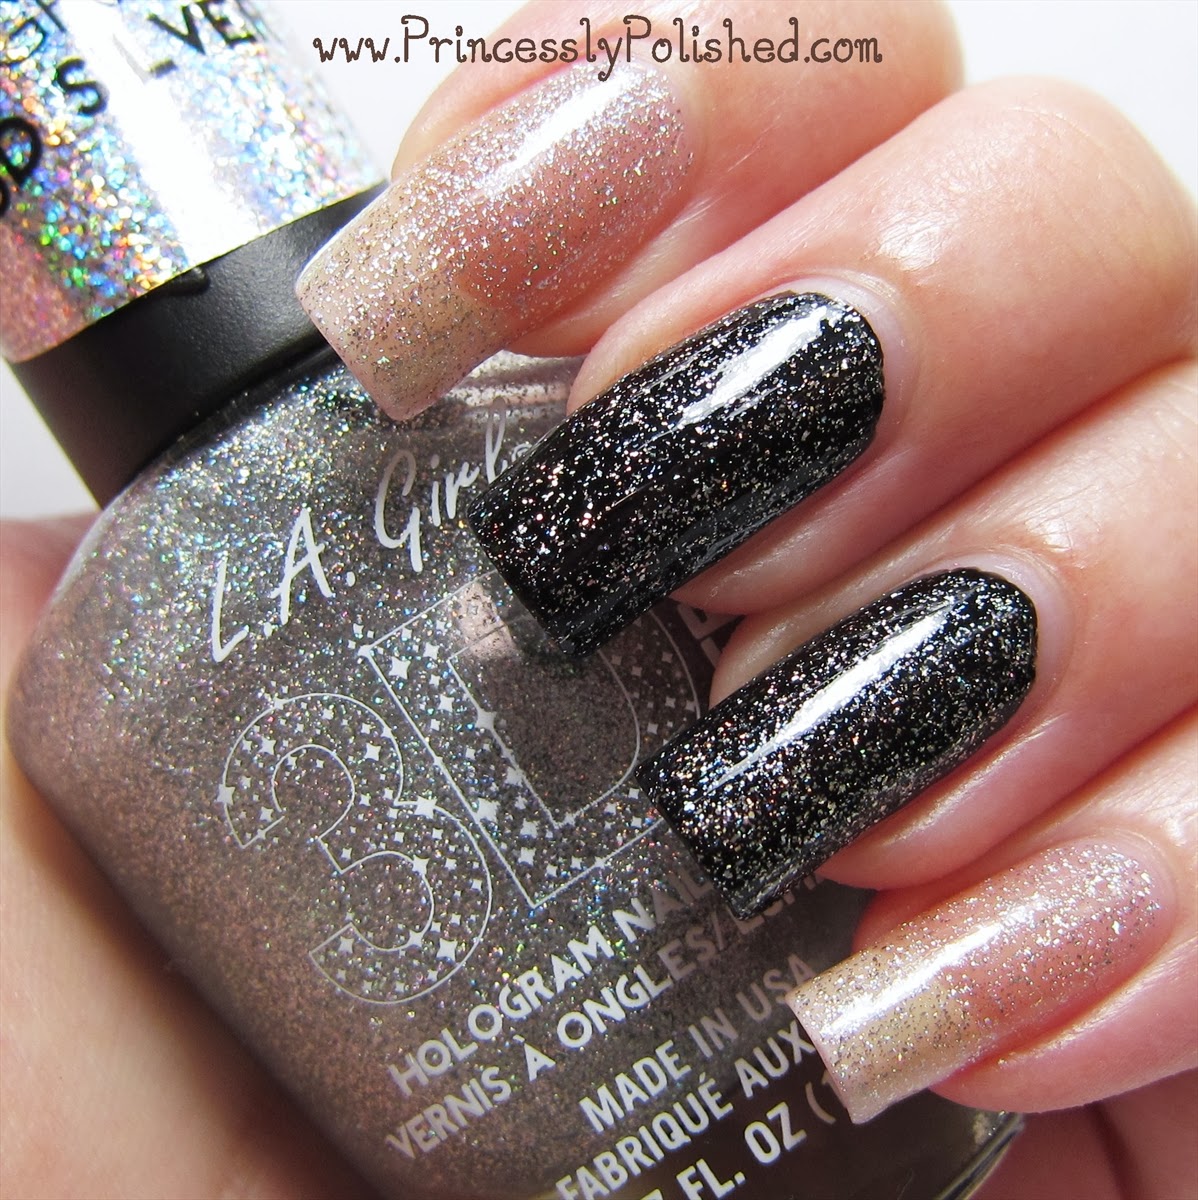 Princessly Polished: My Picks From the L.A. Girl 3D Effects Holographic ...